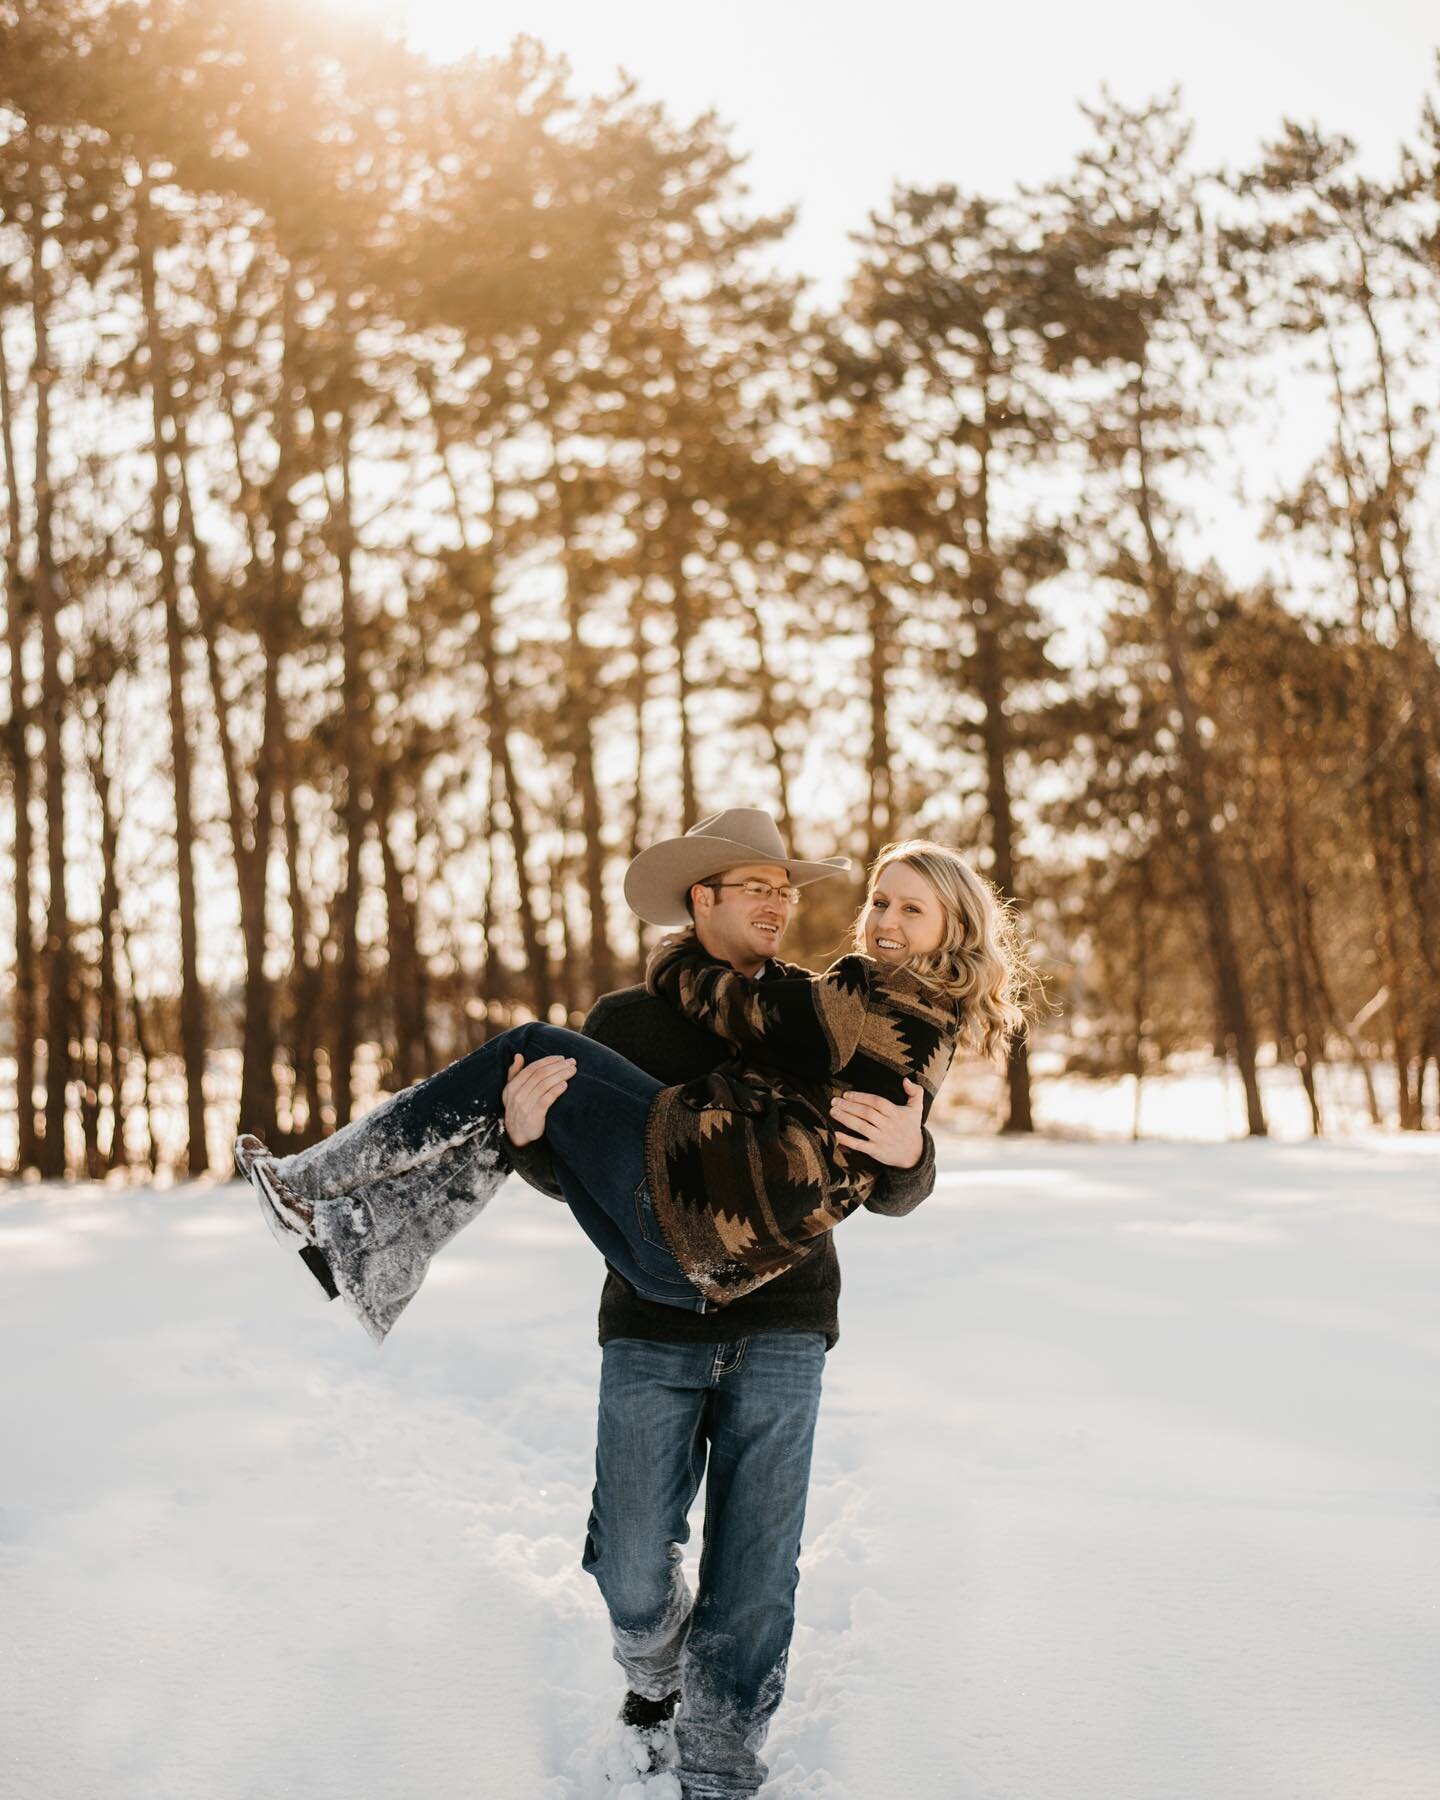 Highly recommend road-tripping across Wisconsin to play in the fresh snow with Emily and Jared!⁣ ⁣

&bull;
&bull;
⁣&bull;
#mnweddingphotographer #wisconsinbride #wisconsinphotographer #winterengagementphotos #midwestlovestories #midwestphotographer #